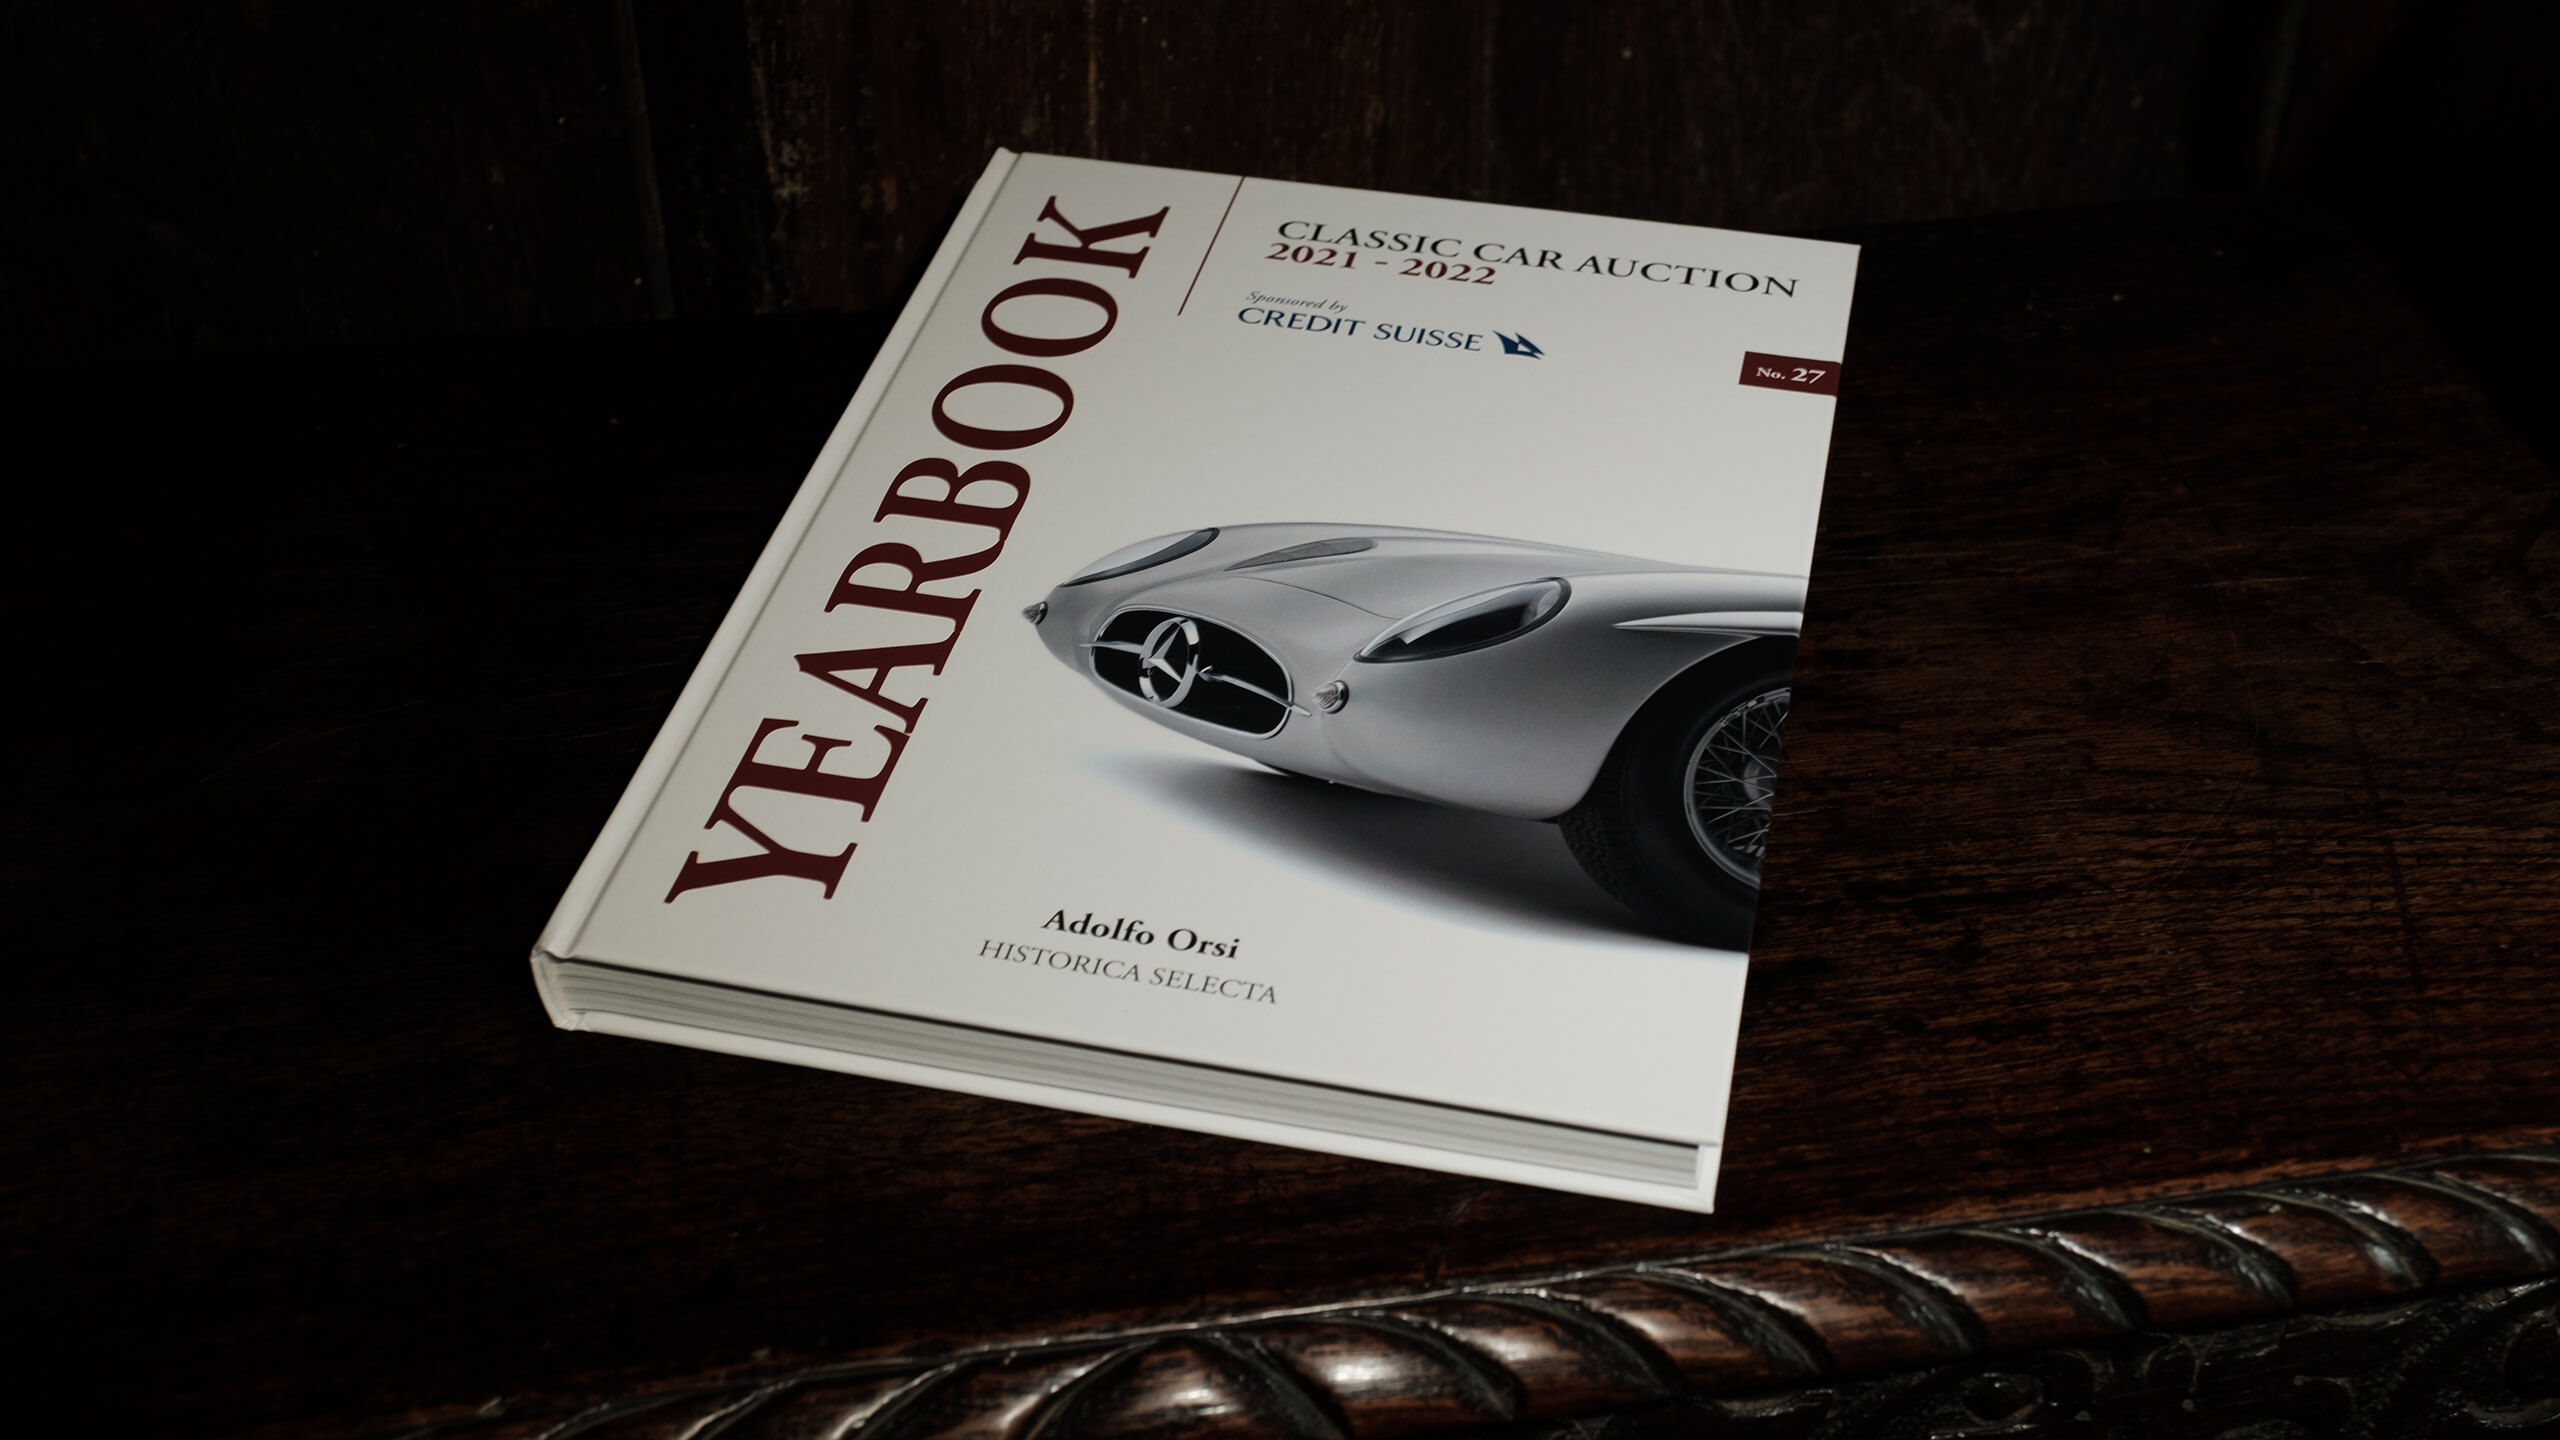 “All positive figures across the board”: Classic Car Auction Yearbook 2021-2022